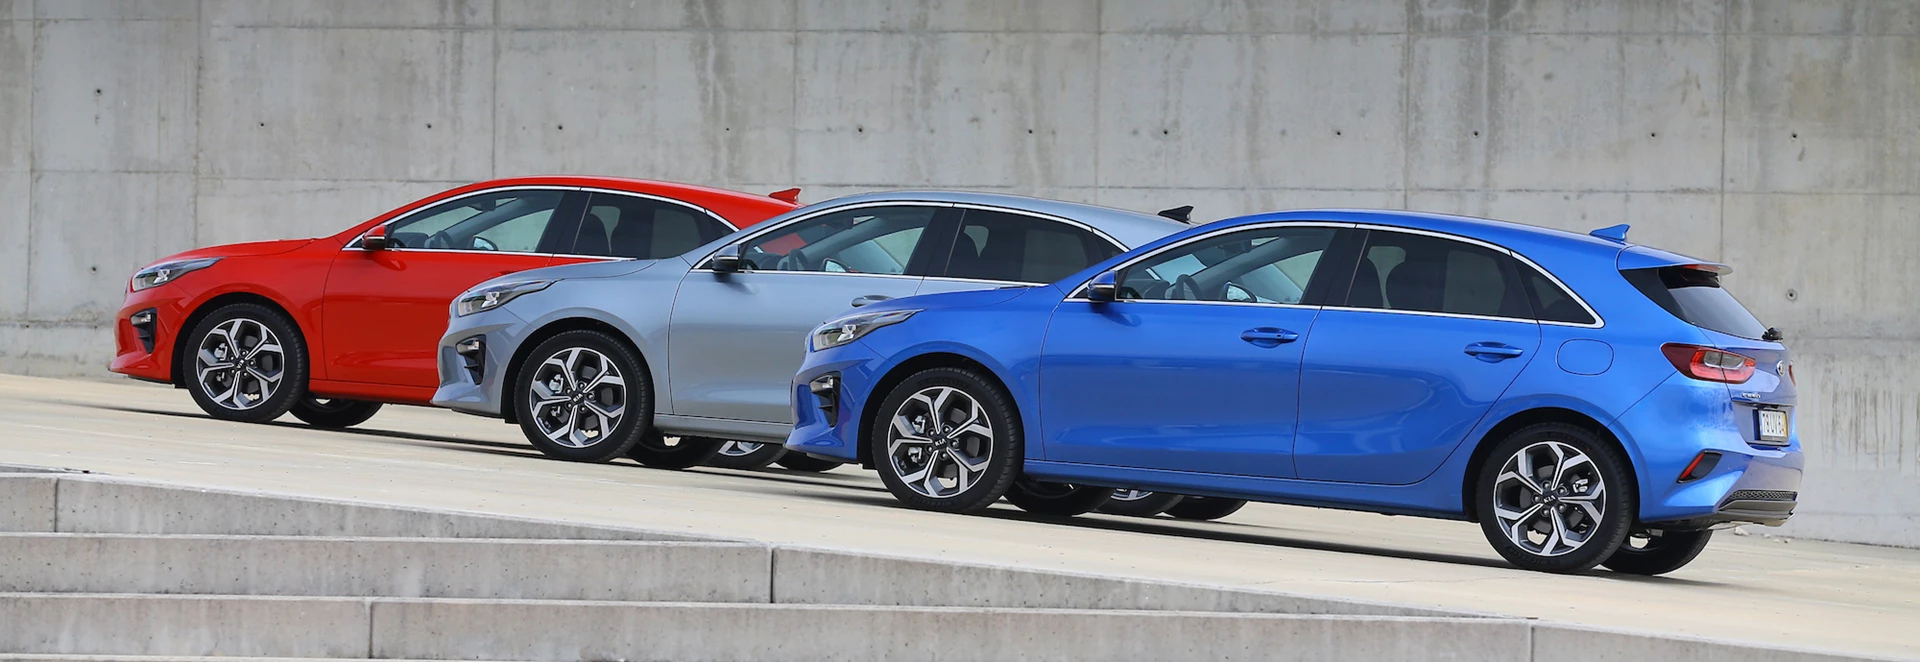 The new KIA Ceed… Interested? You should be!